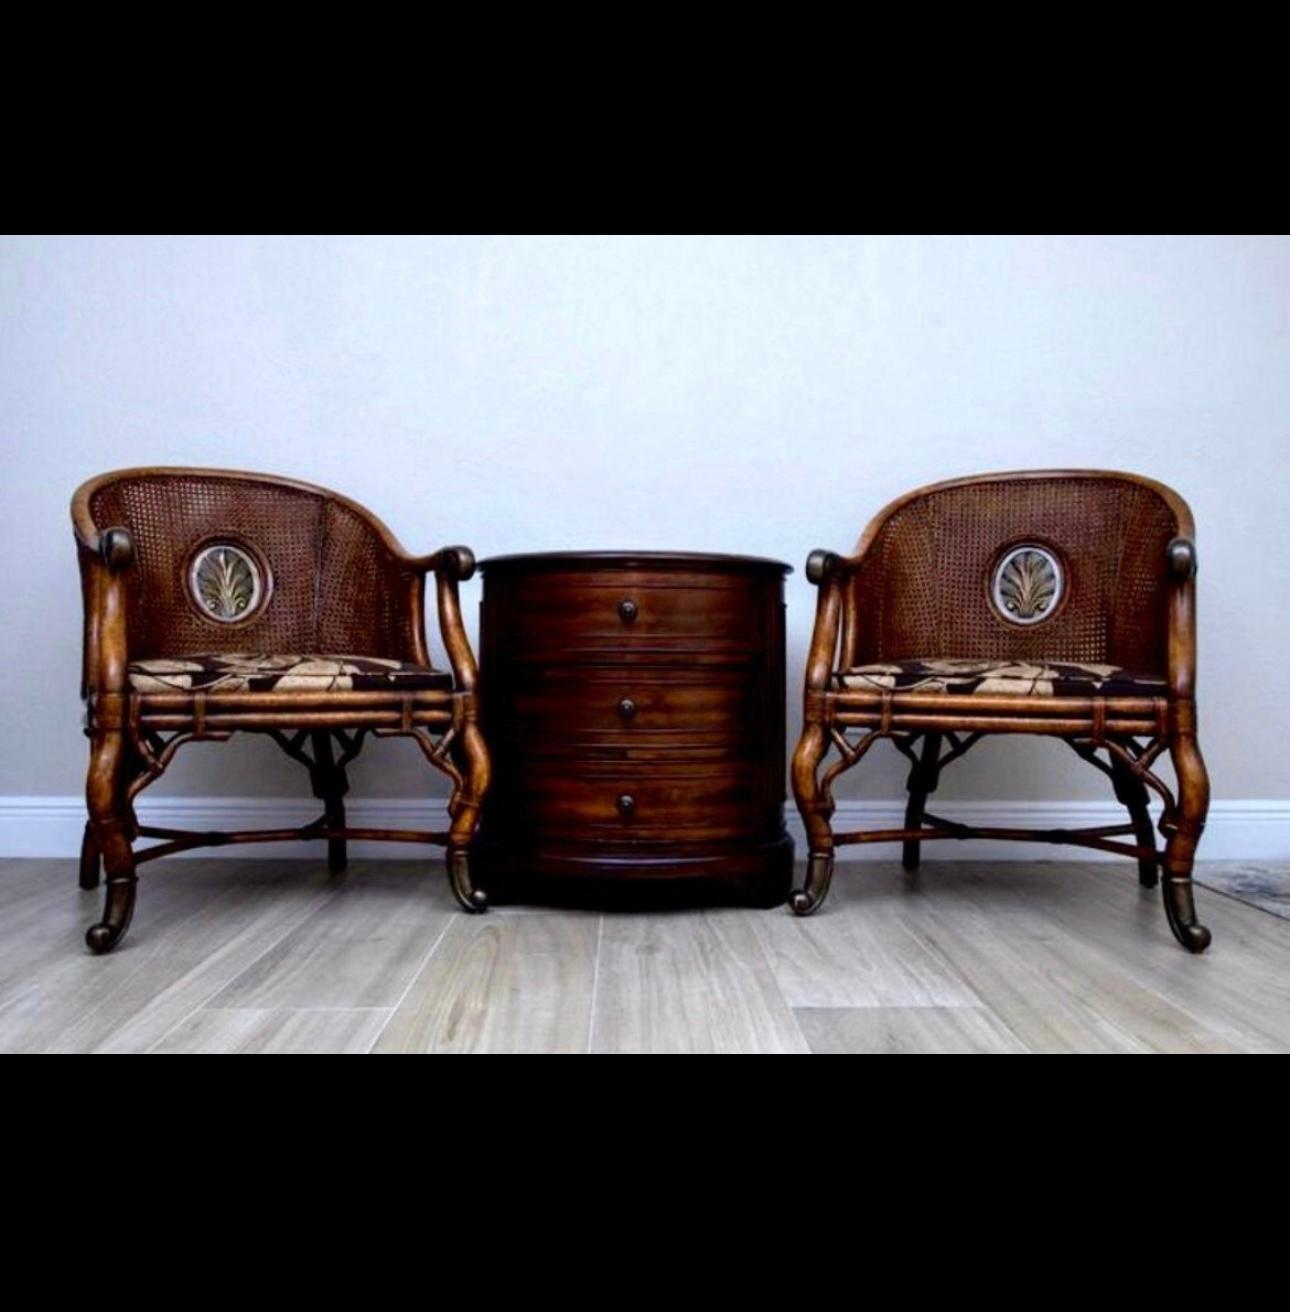 This is a one of a kind set of vintage Japanese armchairs. This style of furniture from Japan is highly sought after around the world for its unique aesthetic. 

The tortoise shell painted frame features double caning with silver gilt metal Hand